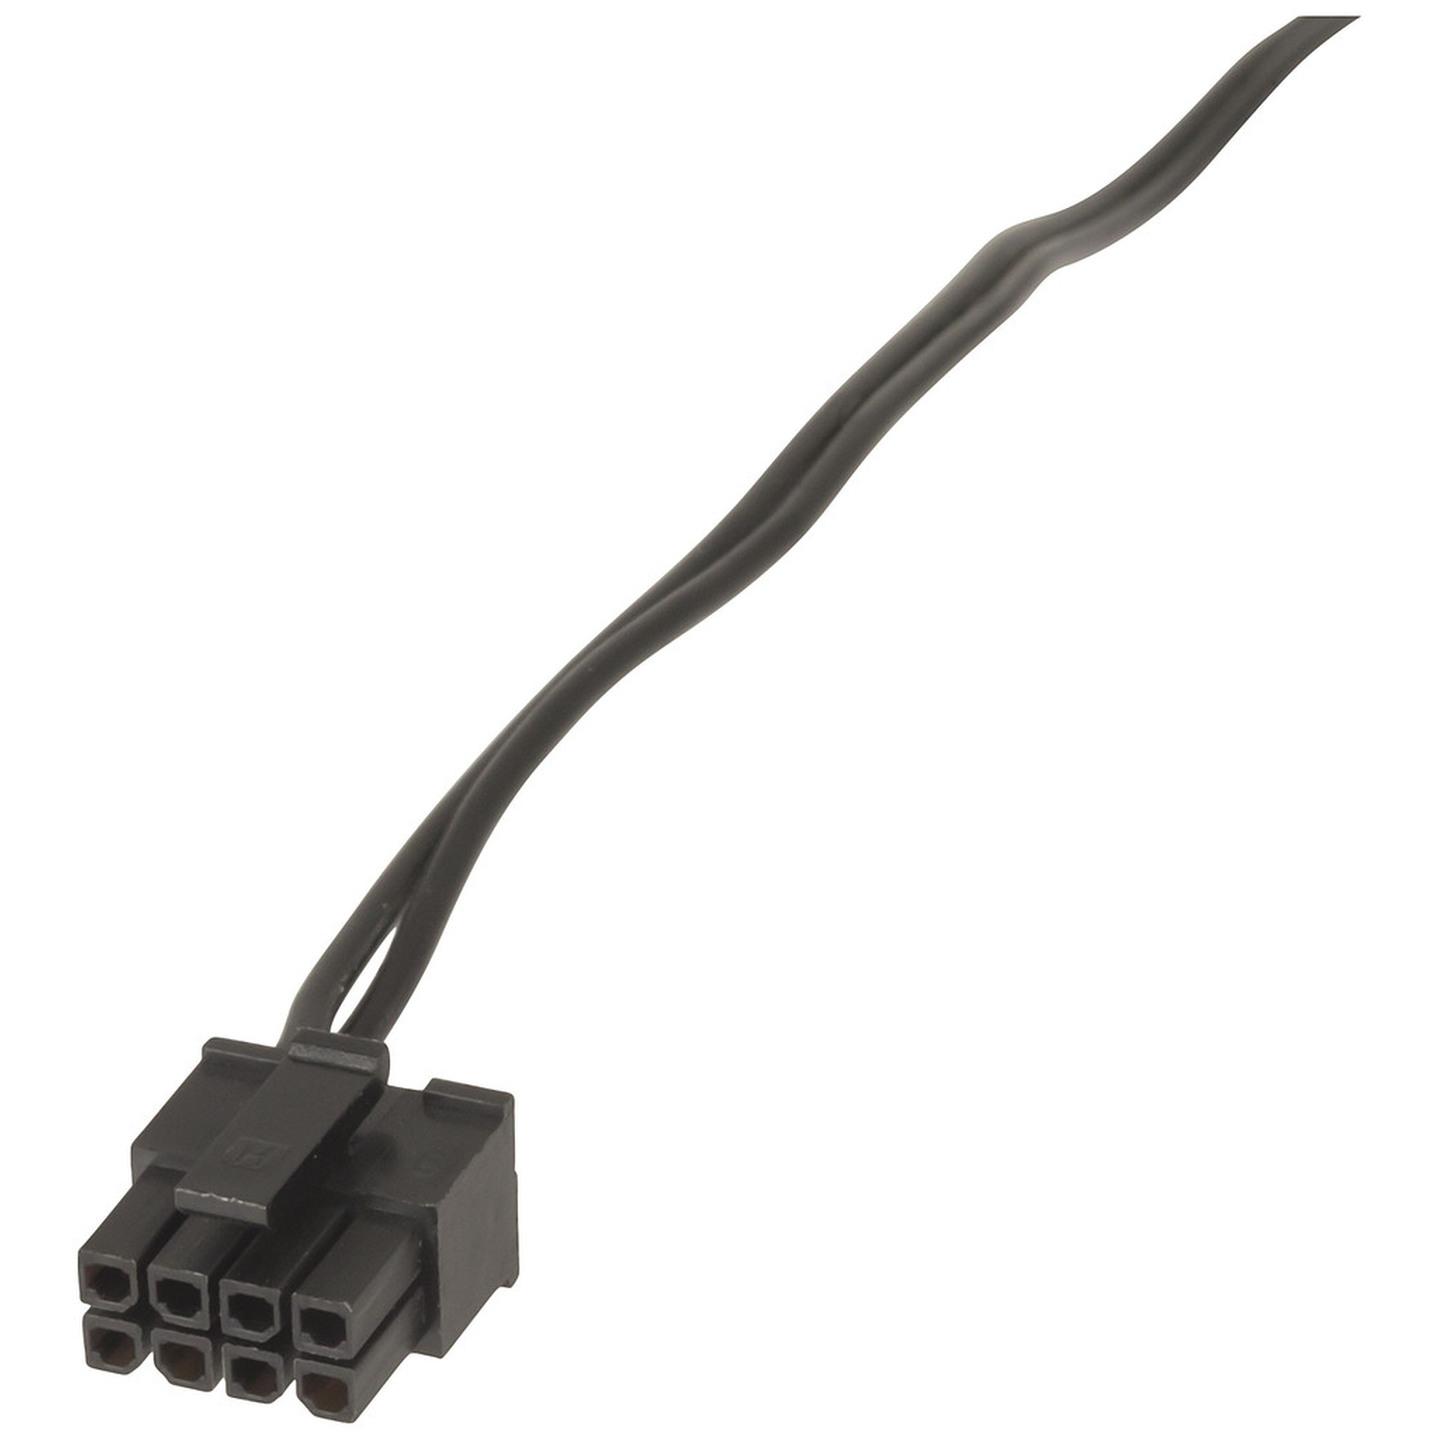 300mm NBN/UFB Power Connection Cable